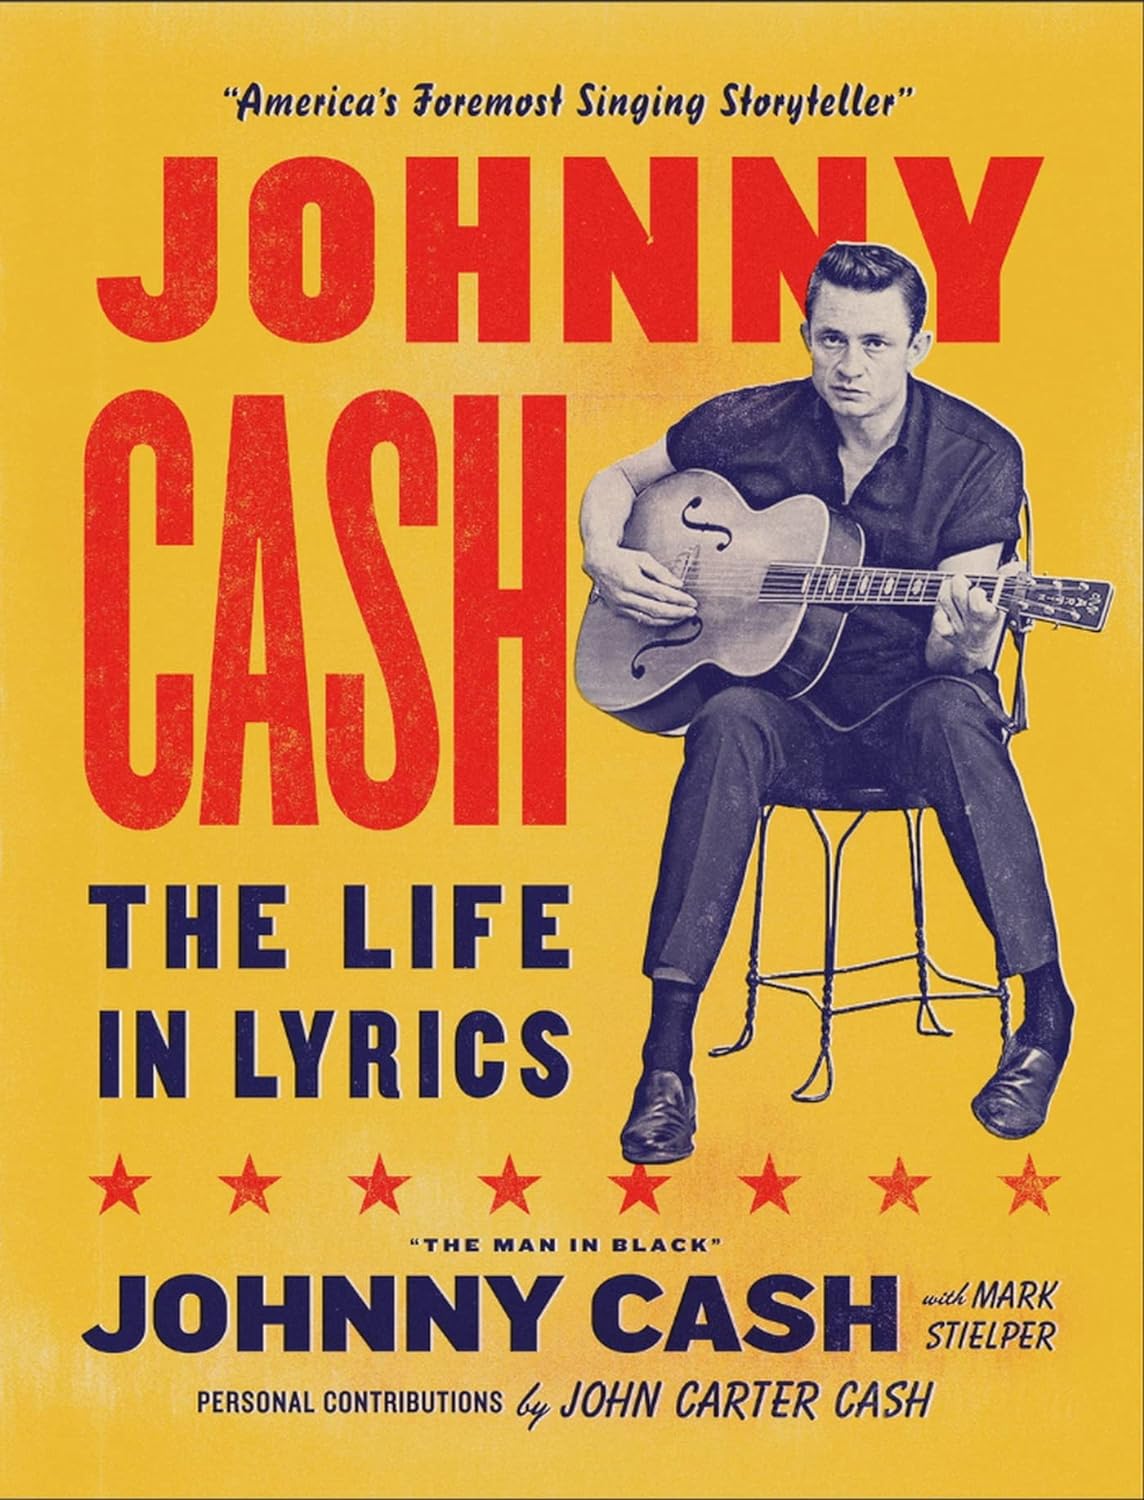 Johnny_Cash_the_life_in_lyrics_book_cover